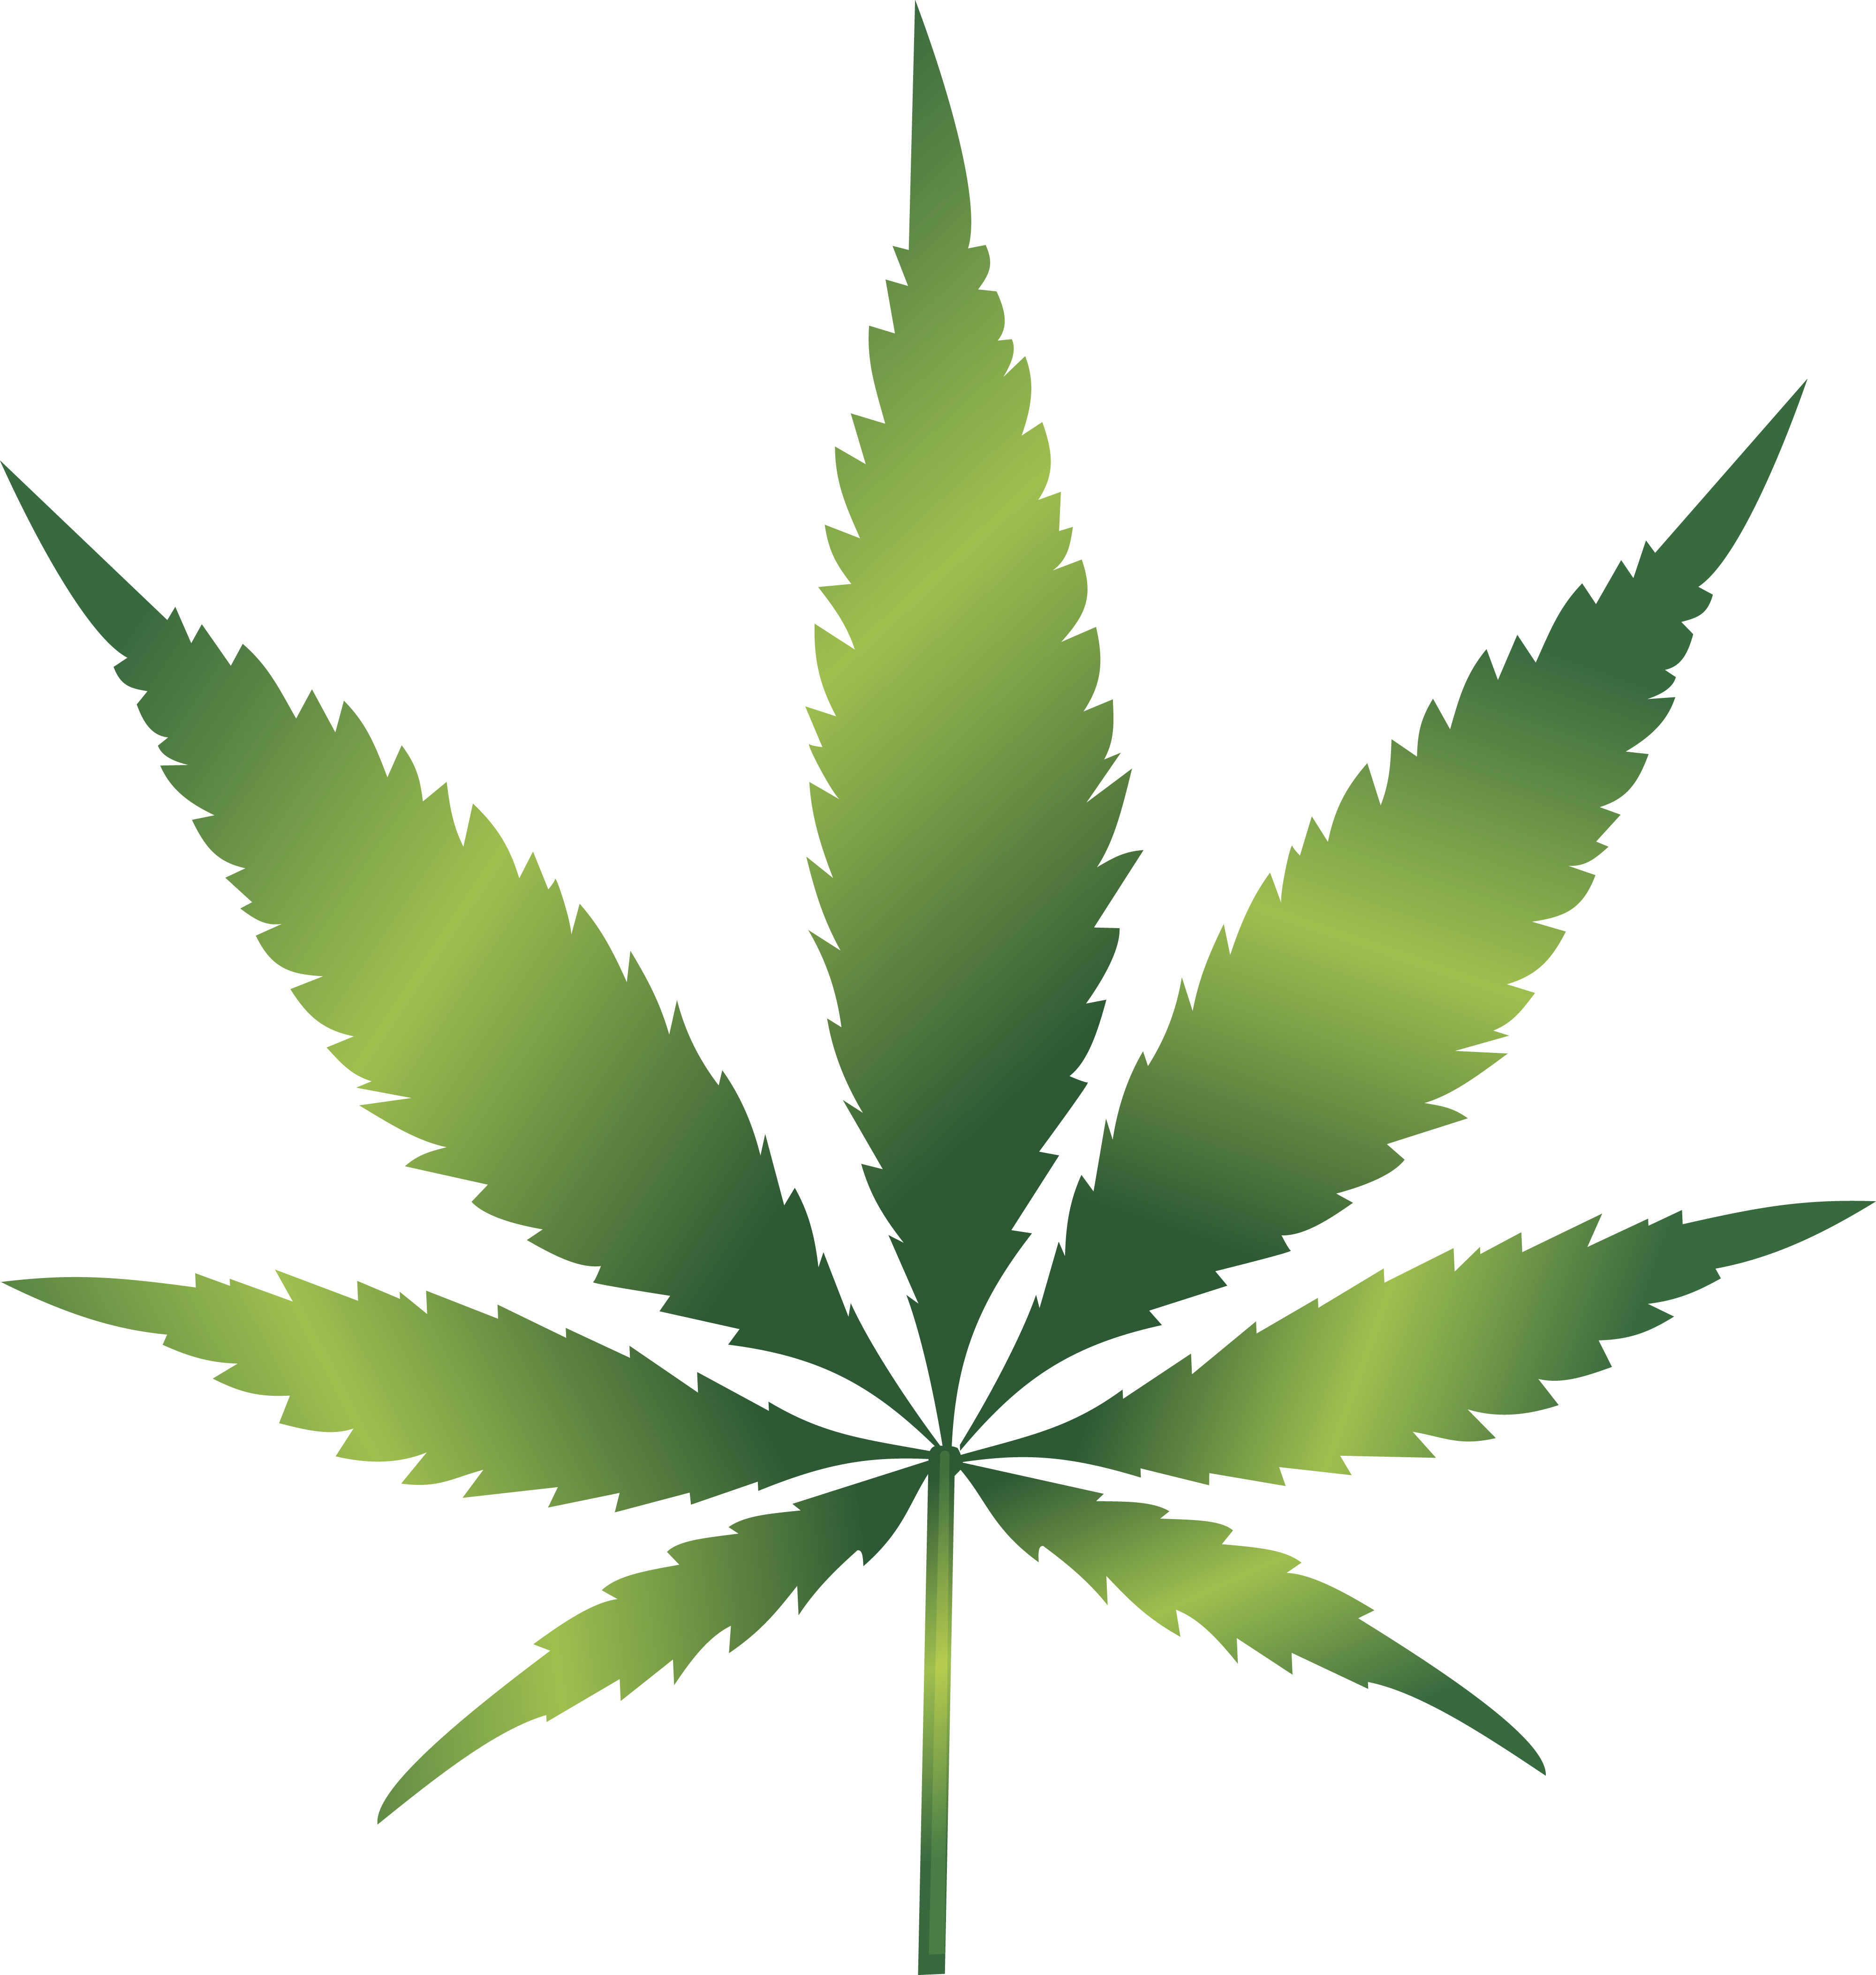 Free Clipart Of A Cannabis Leaf Learn how to draw step by step in a fun way!come join and follow us to learn how to draw. free clipart